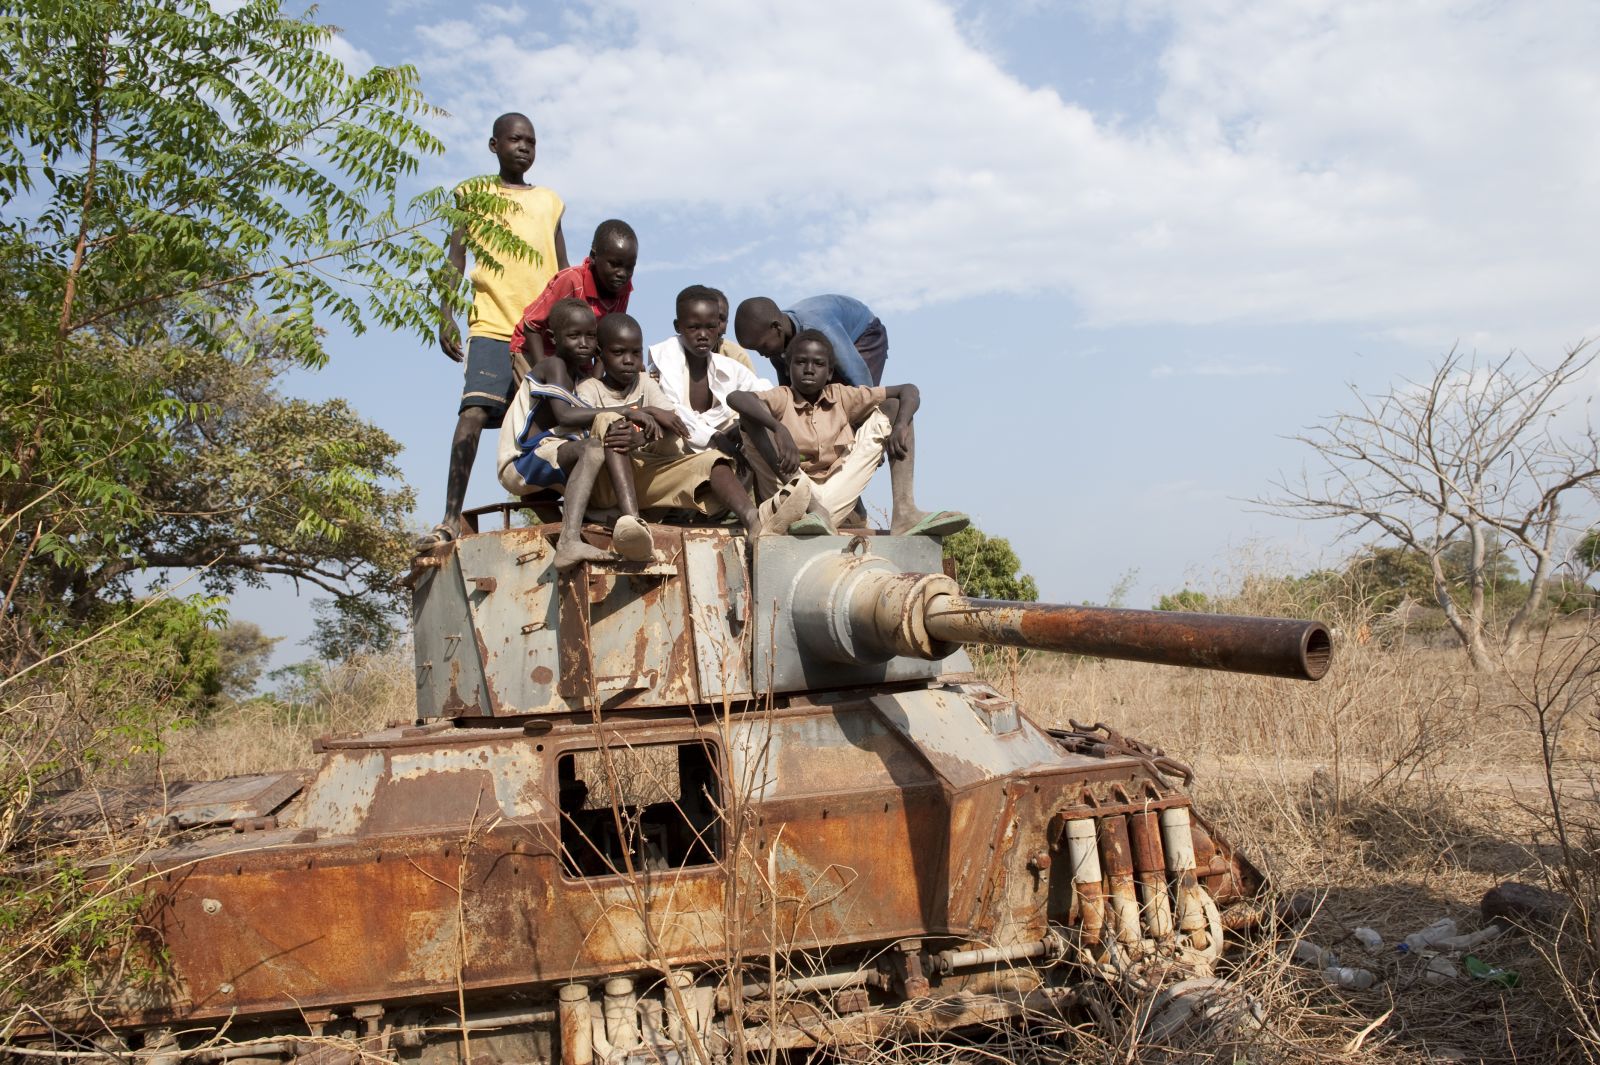 Children at play in war-torn South Sudan.